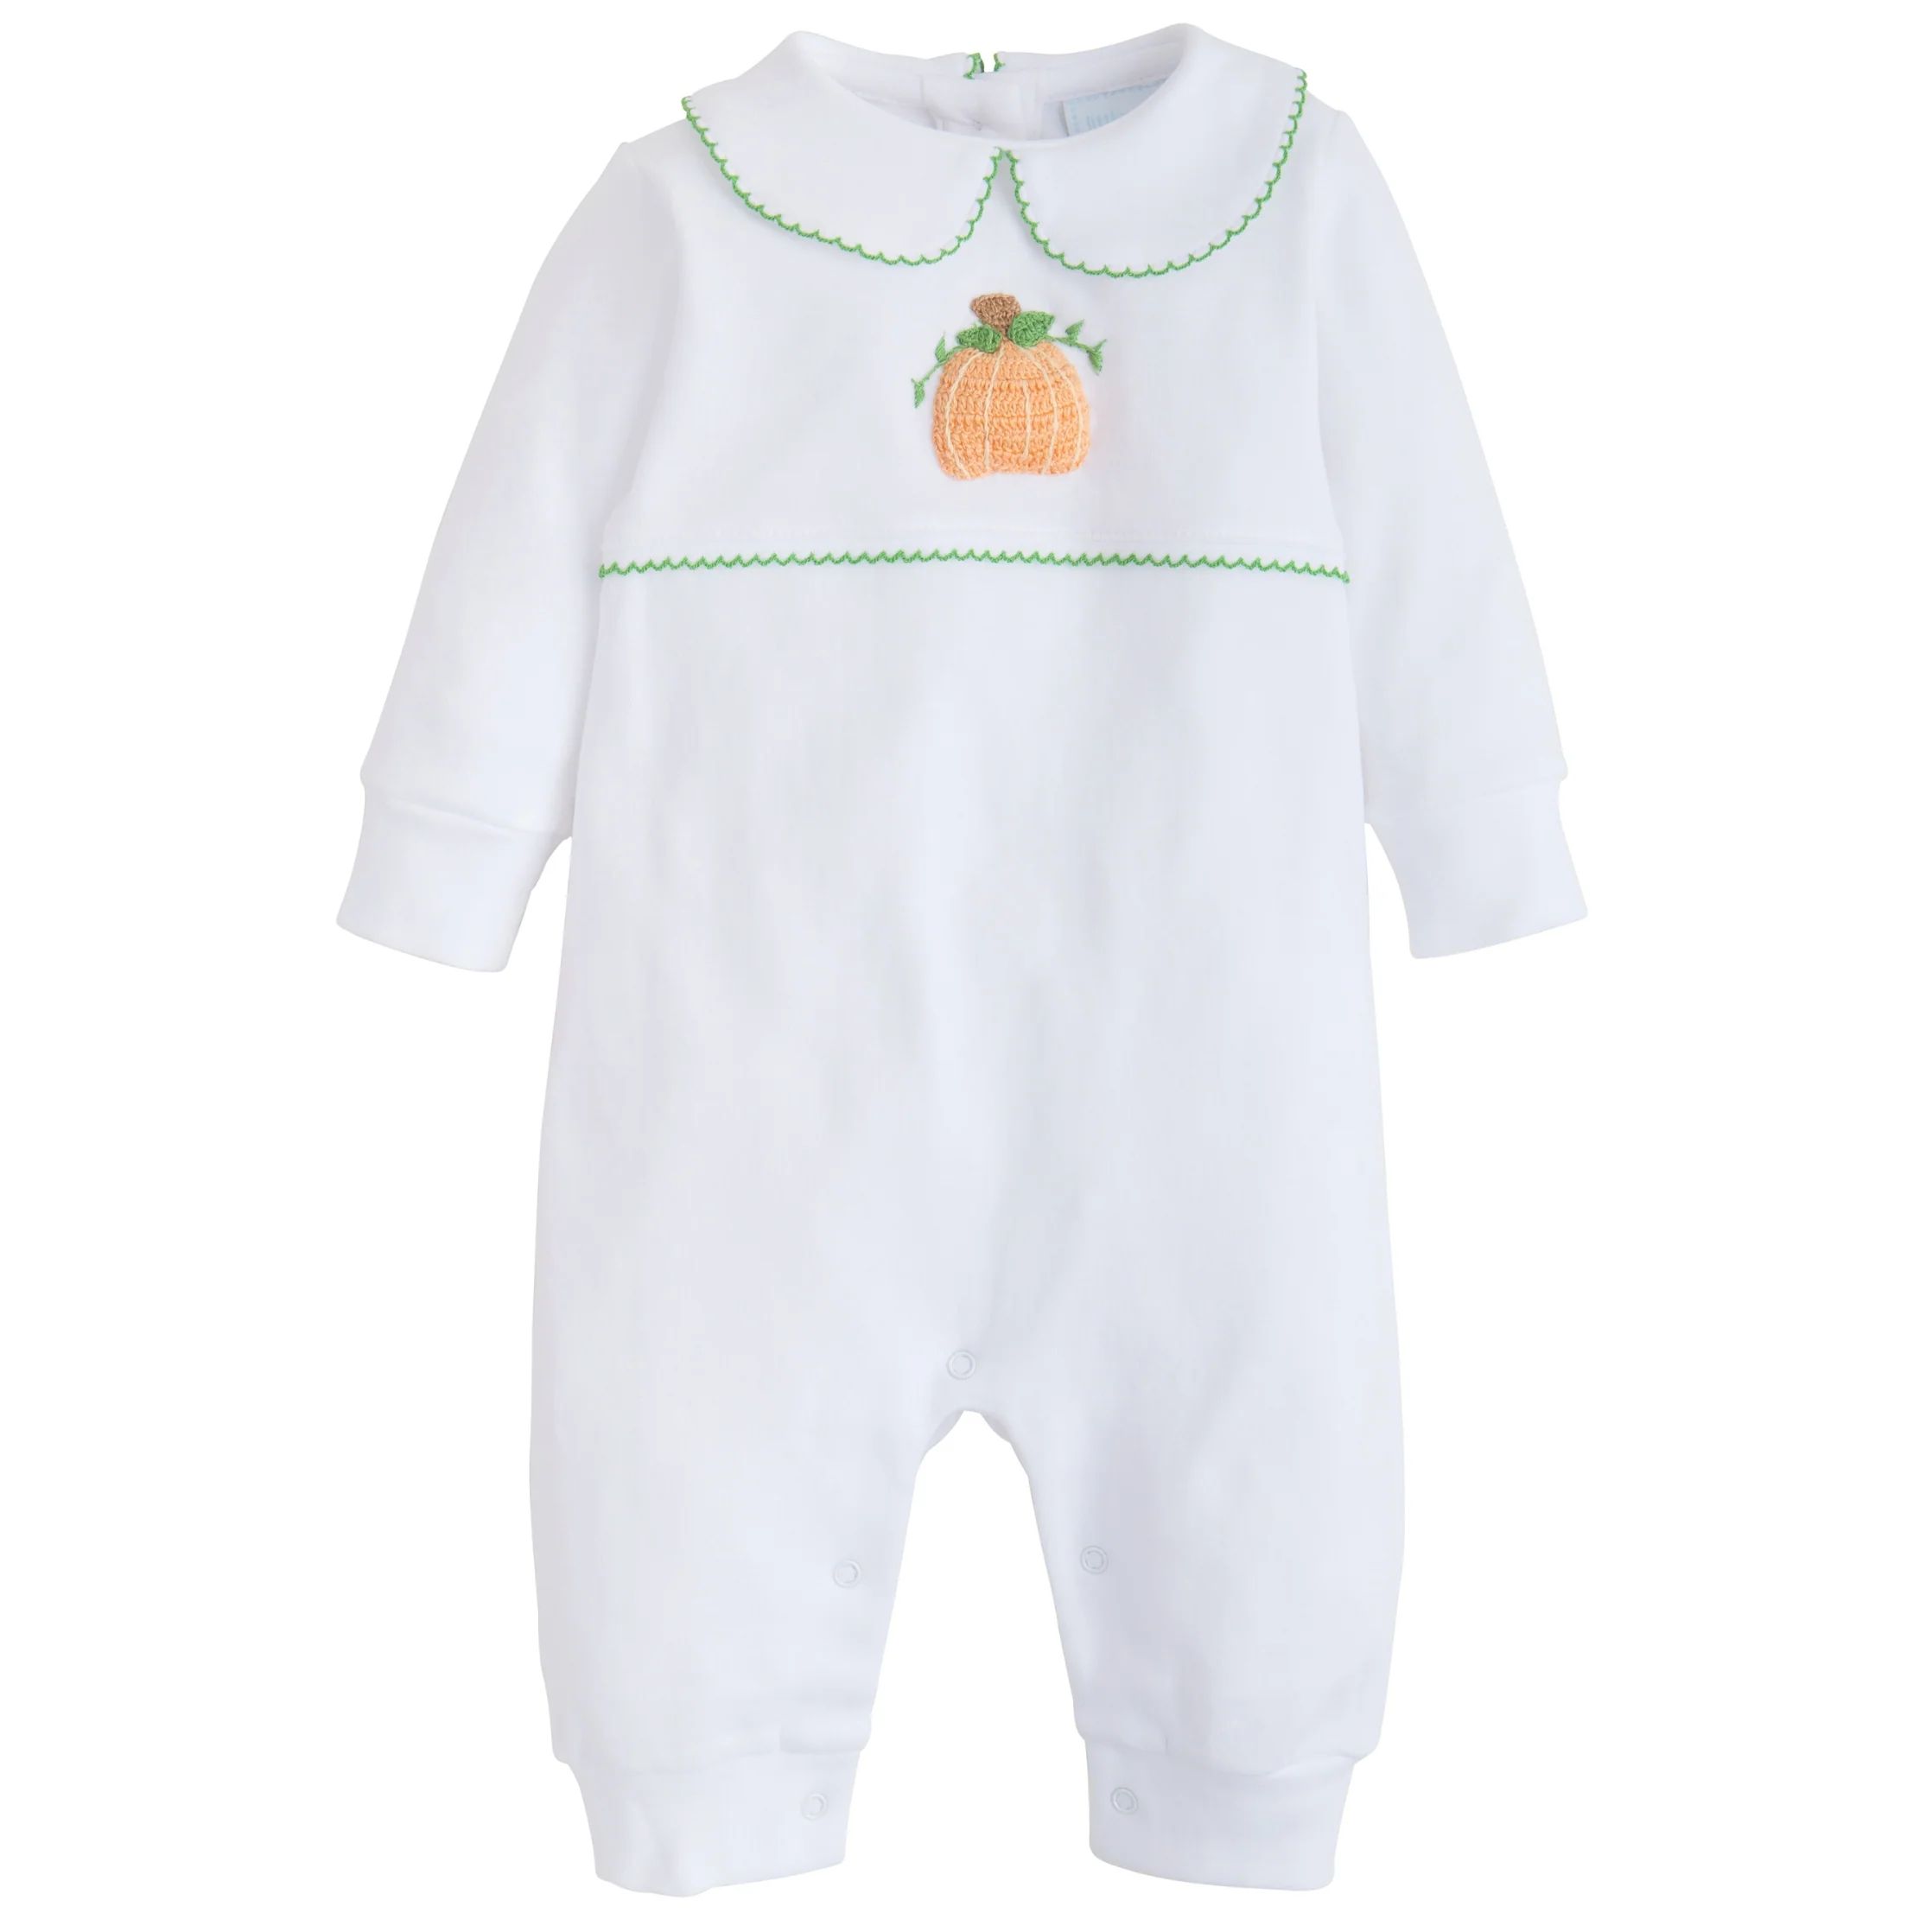 Baby Boutique Outfit - Kids Halloween Clothes | Little English